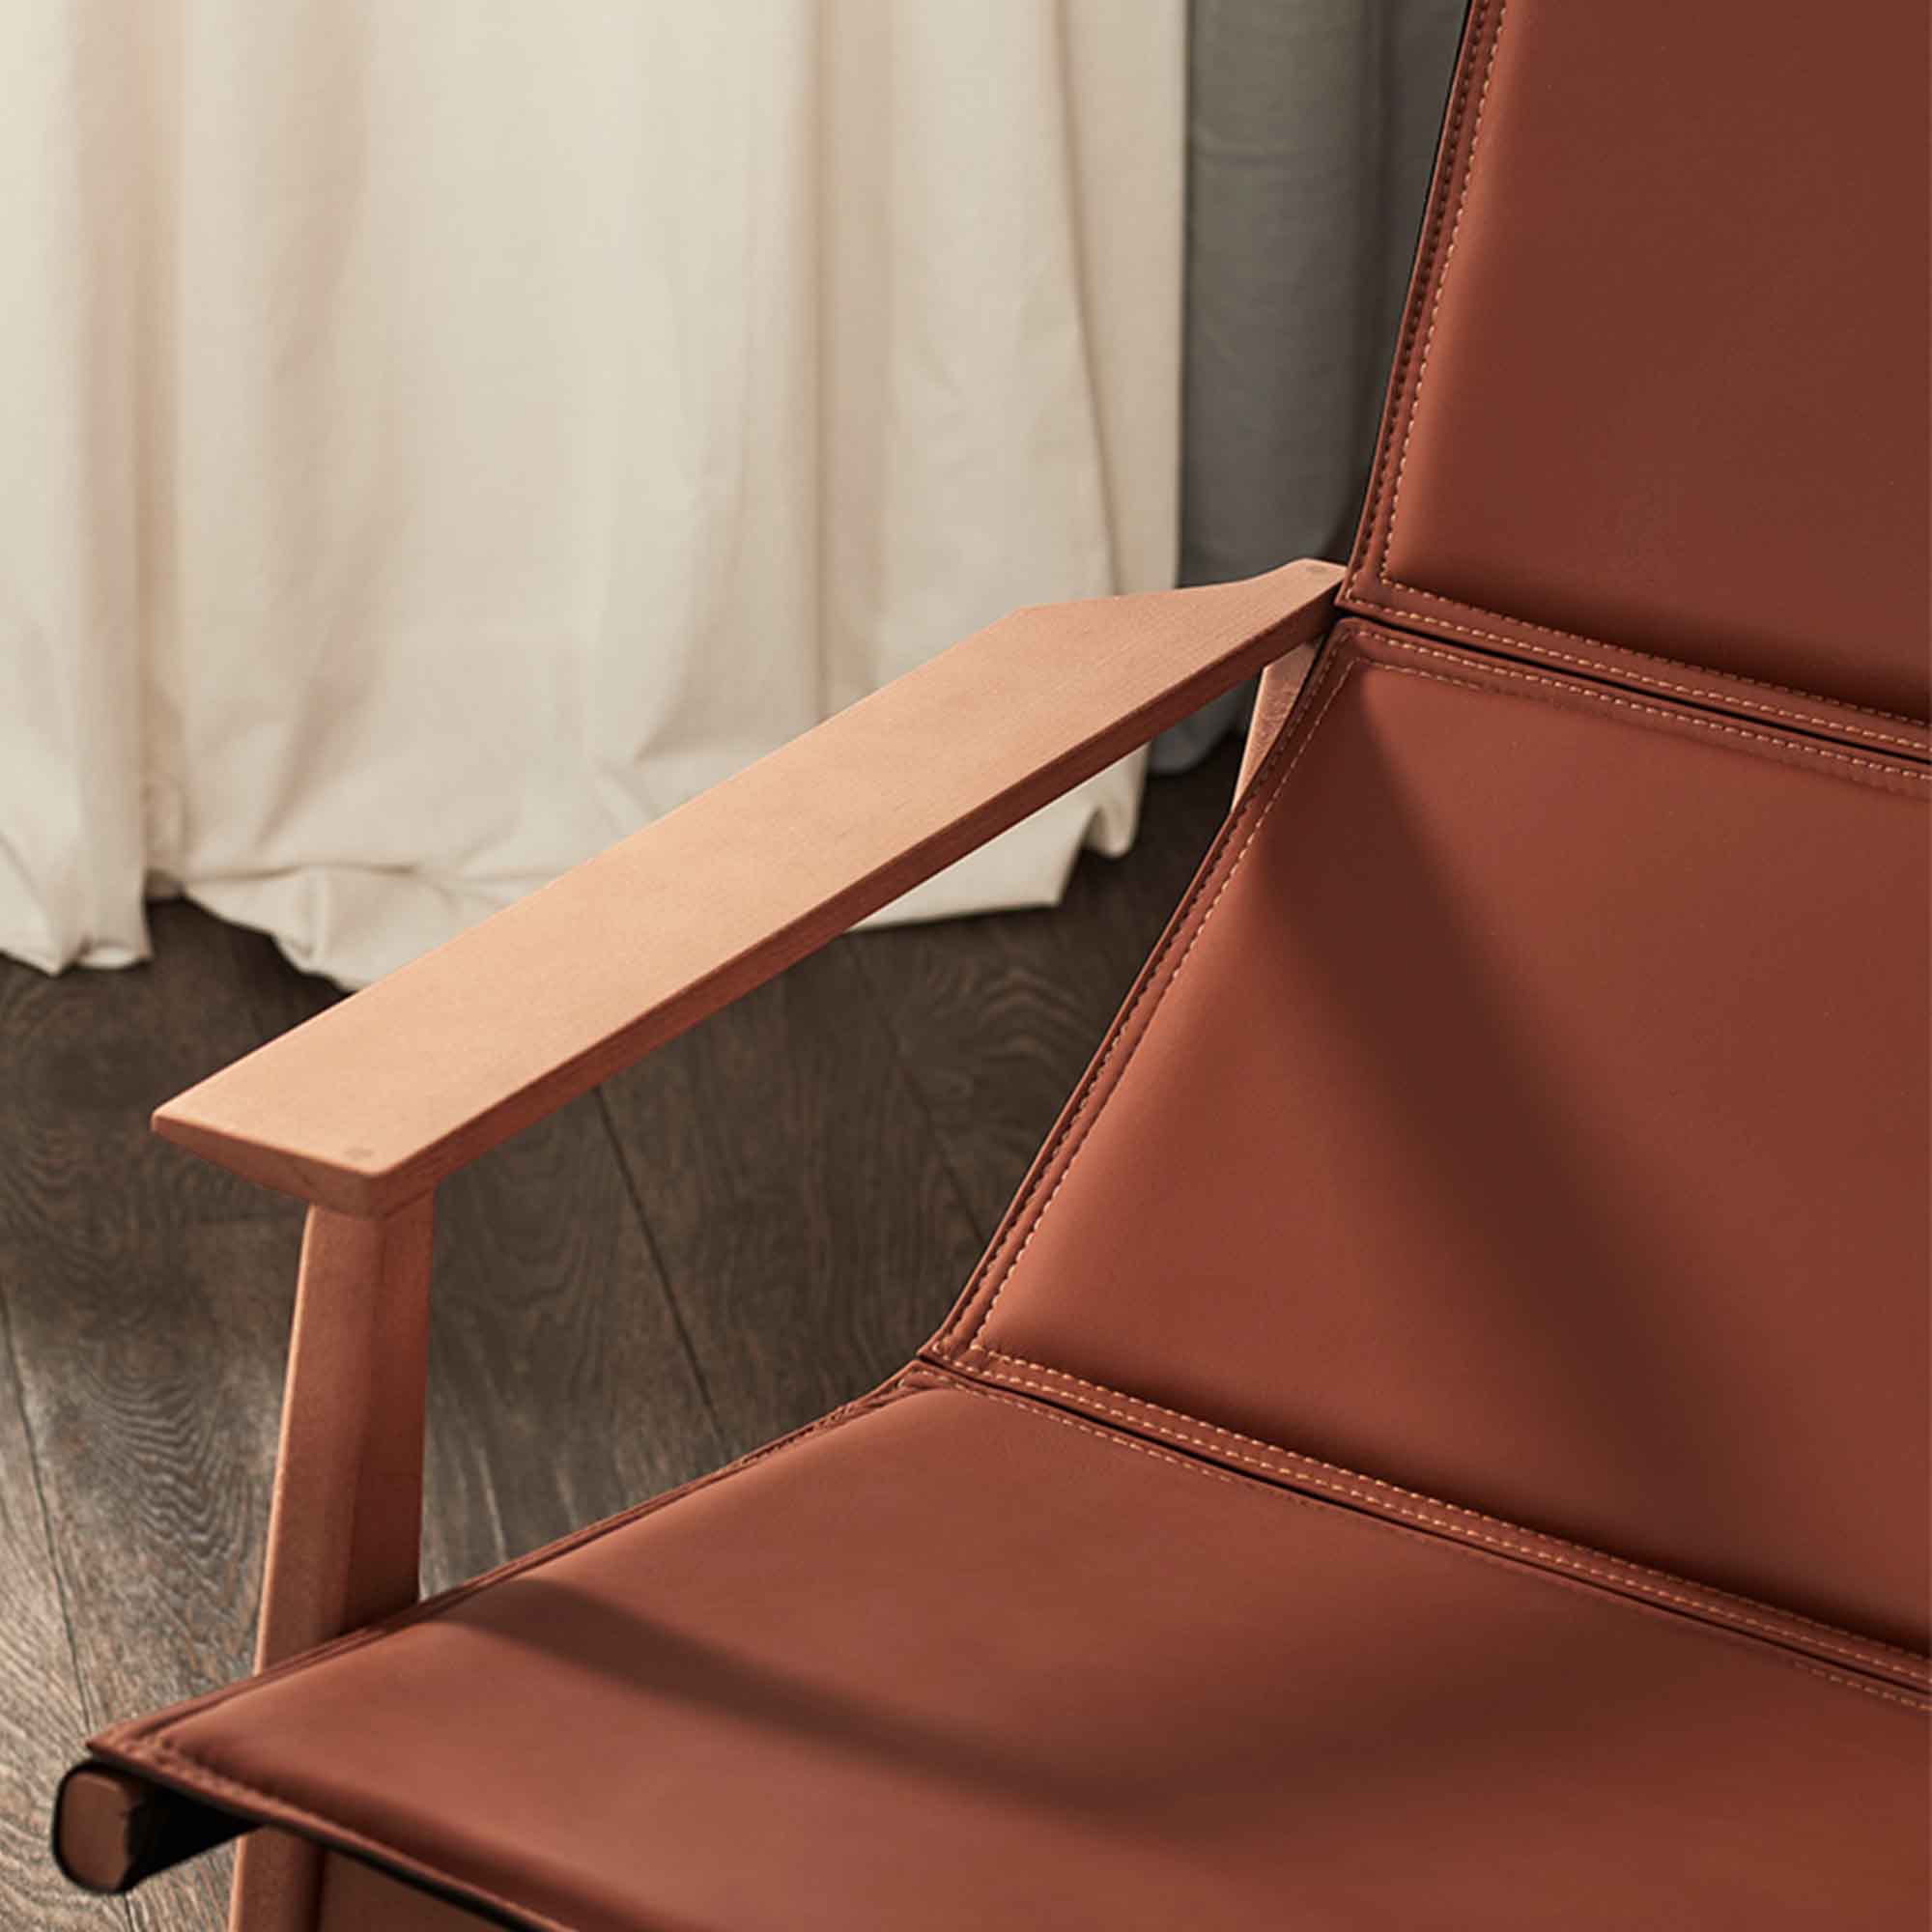 ICONICA Lounge Chair natural bech armrest, brown leather upholstery, close interior view at armrest